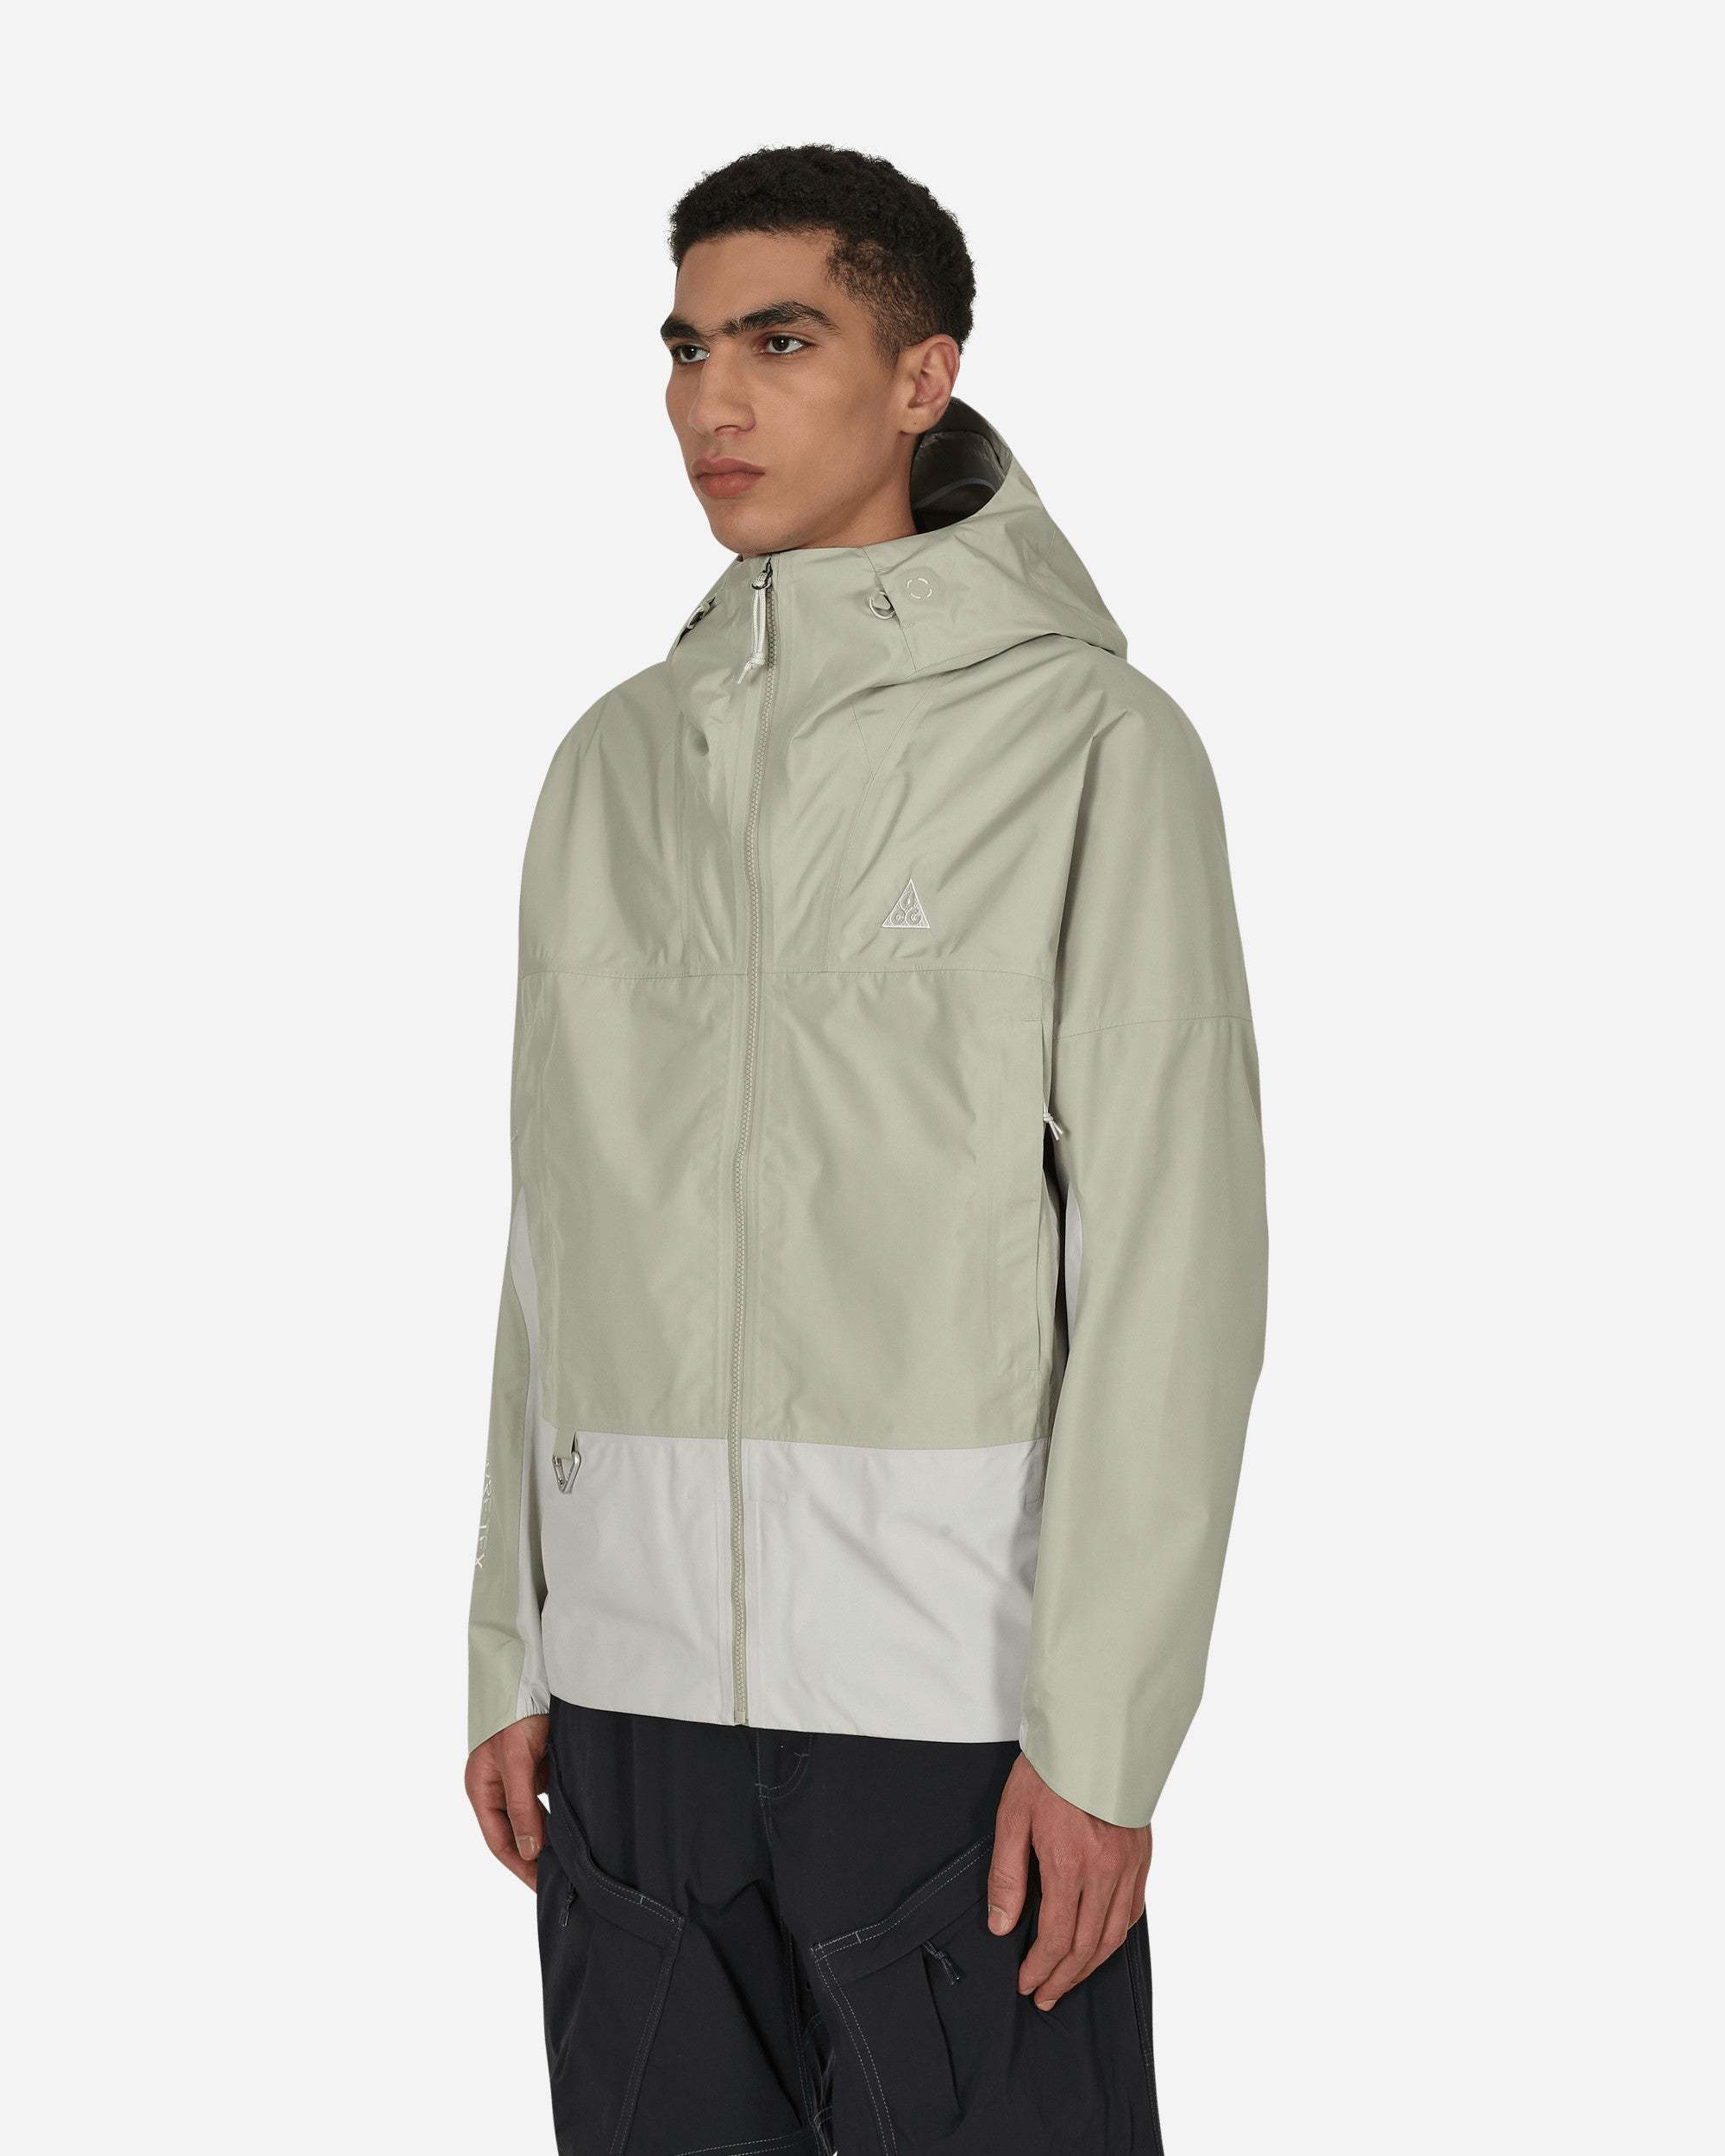 Storm Fit Adv Acg Chain Of Craters Jacket Nike ACG